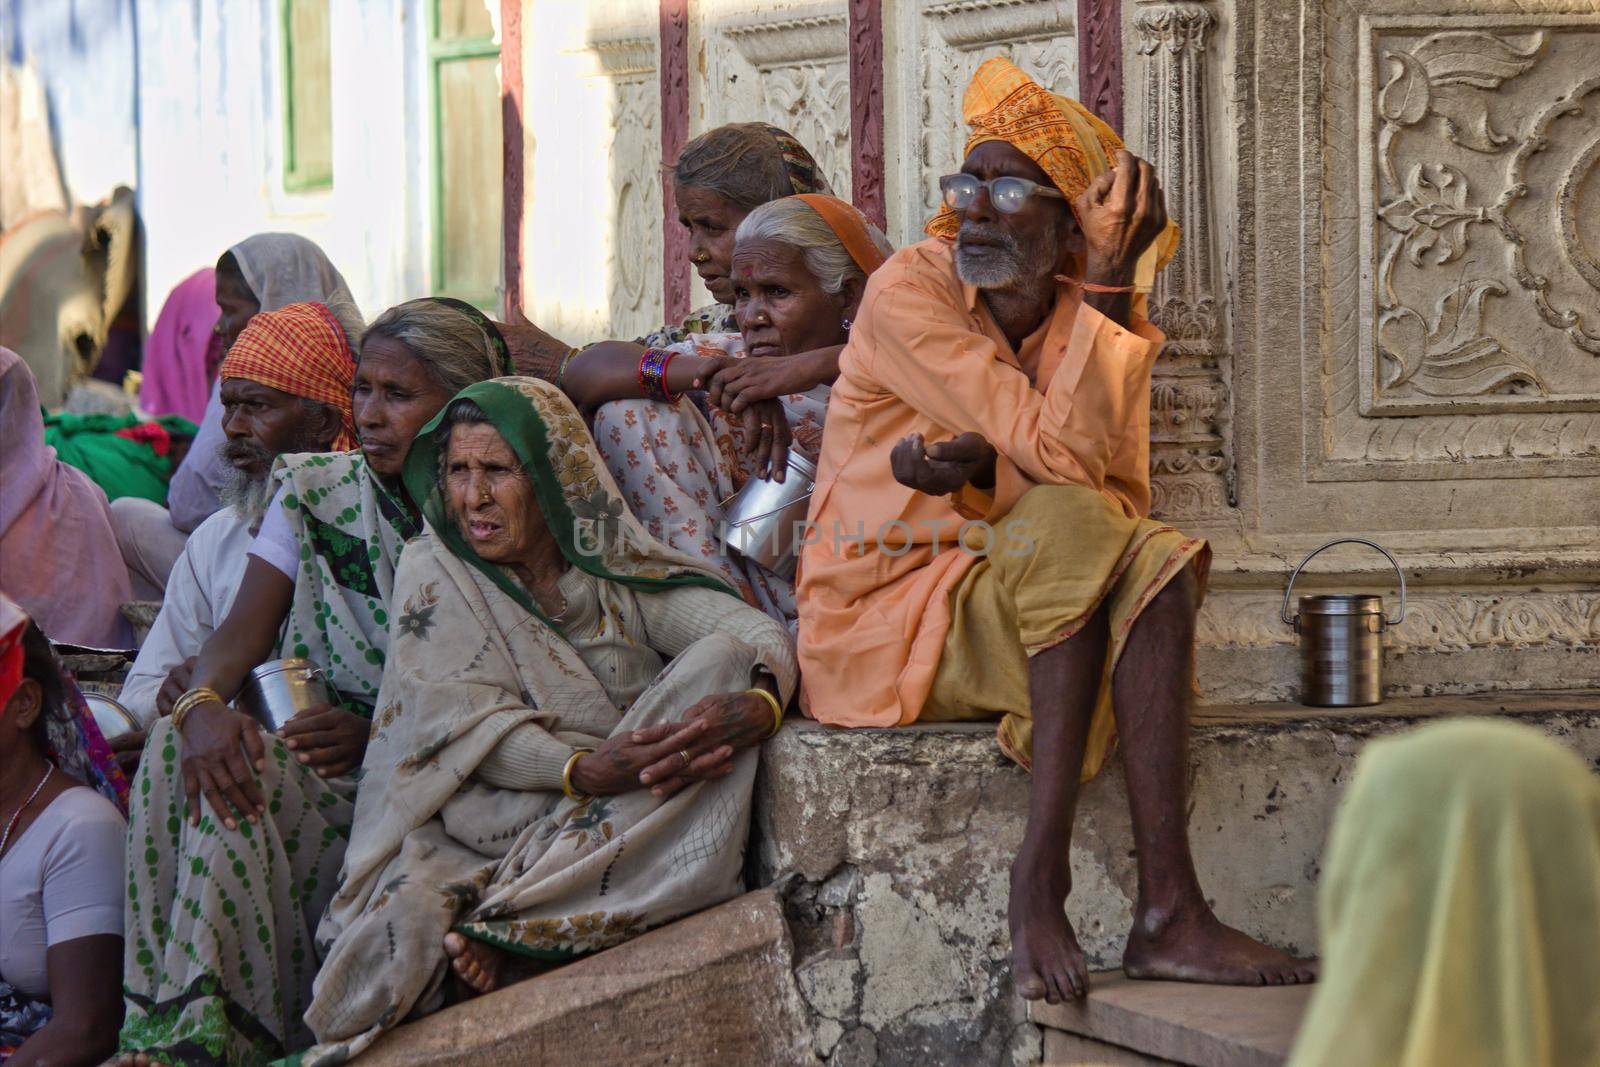 Pushkar, India - November 10, 2016: Bunch of poor people consists of a male with turban and women in saree sitting under the shade waiting for bus in the state of Rajasthan by arpanbhatia